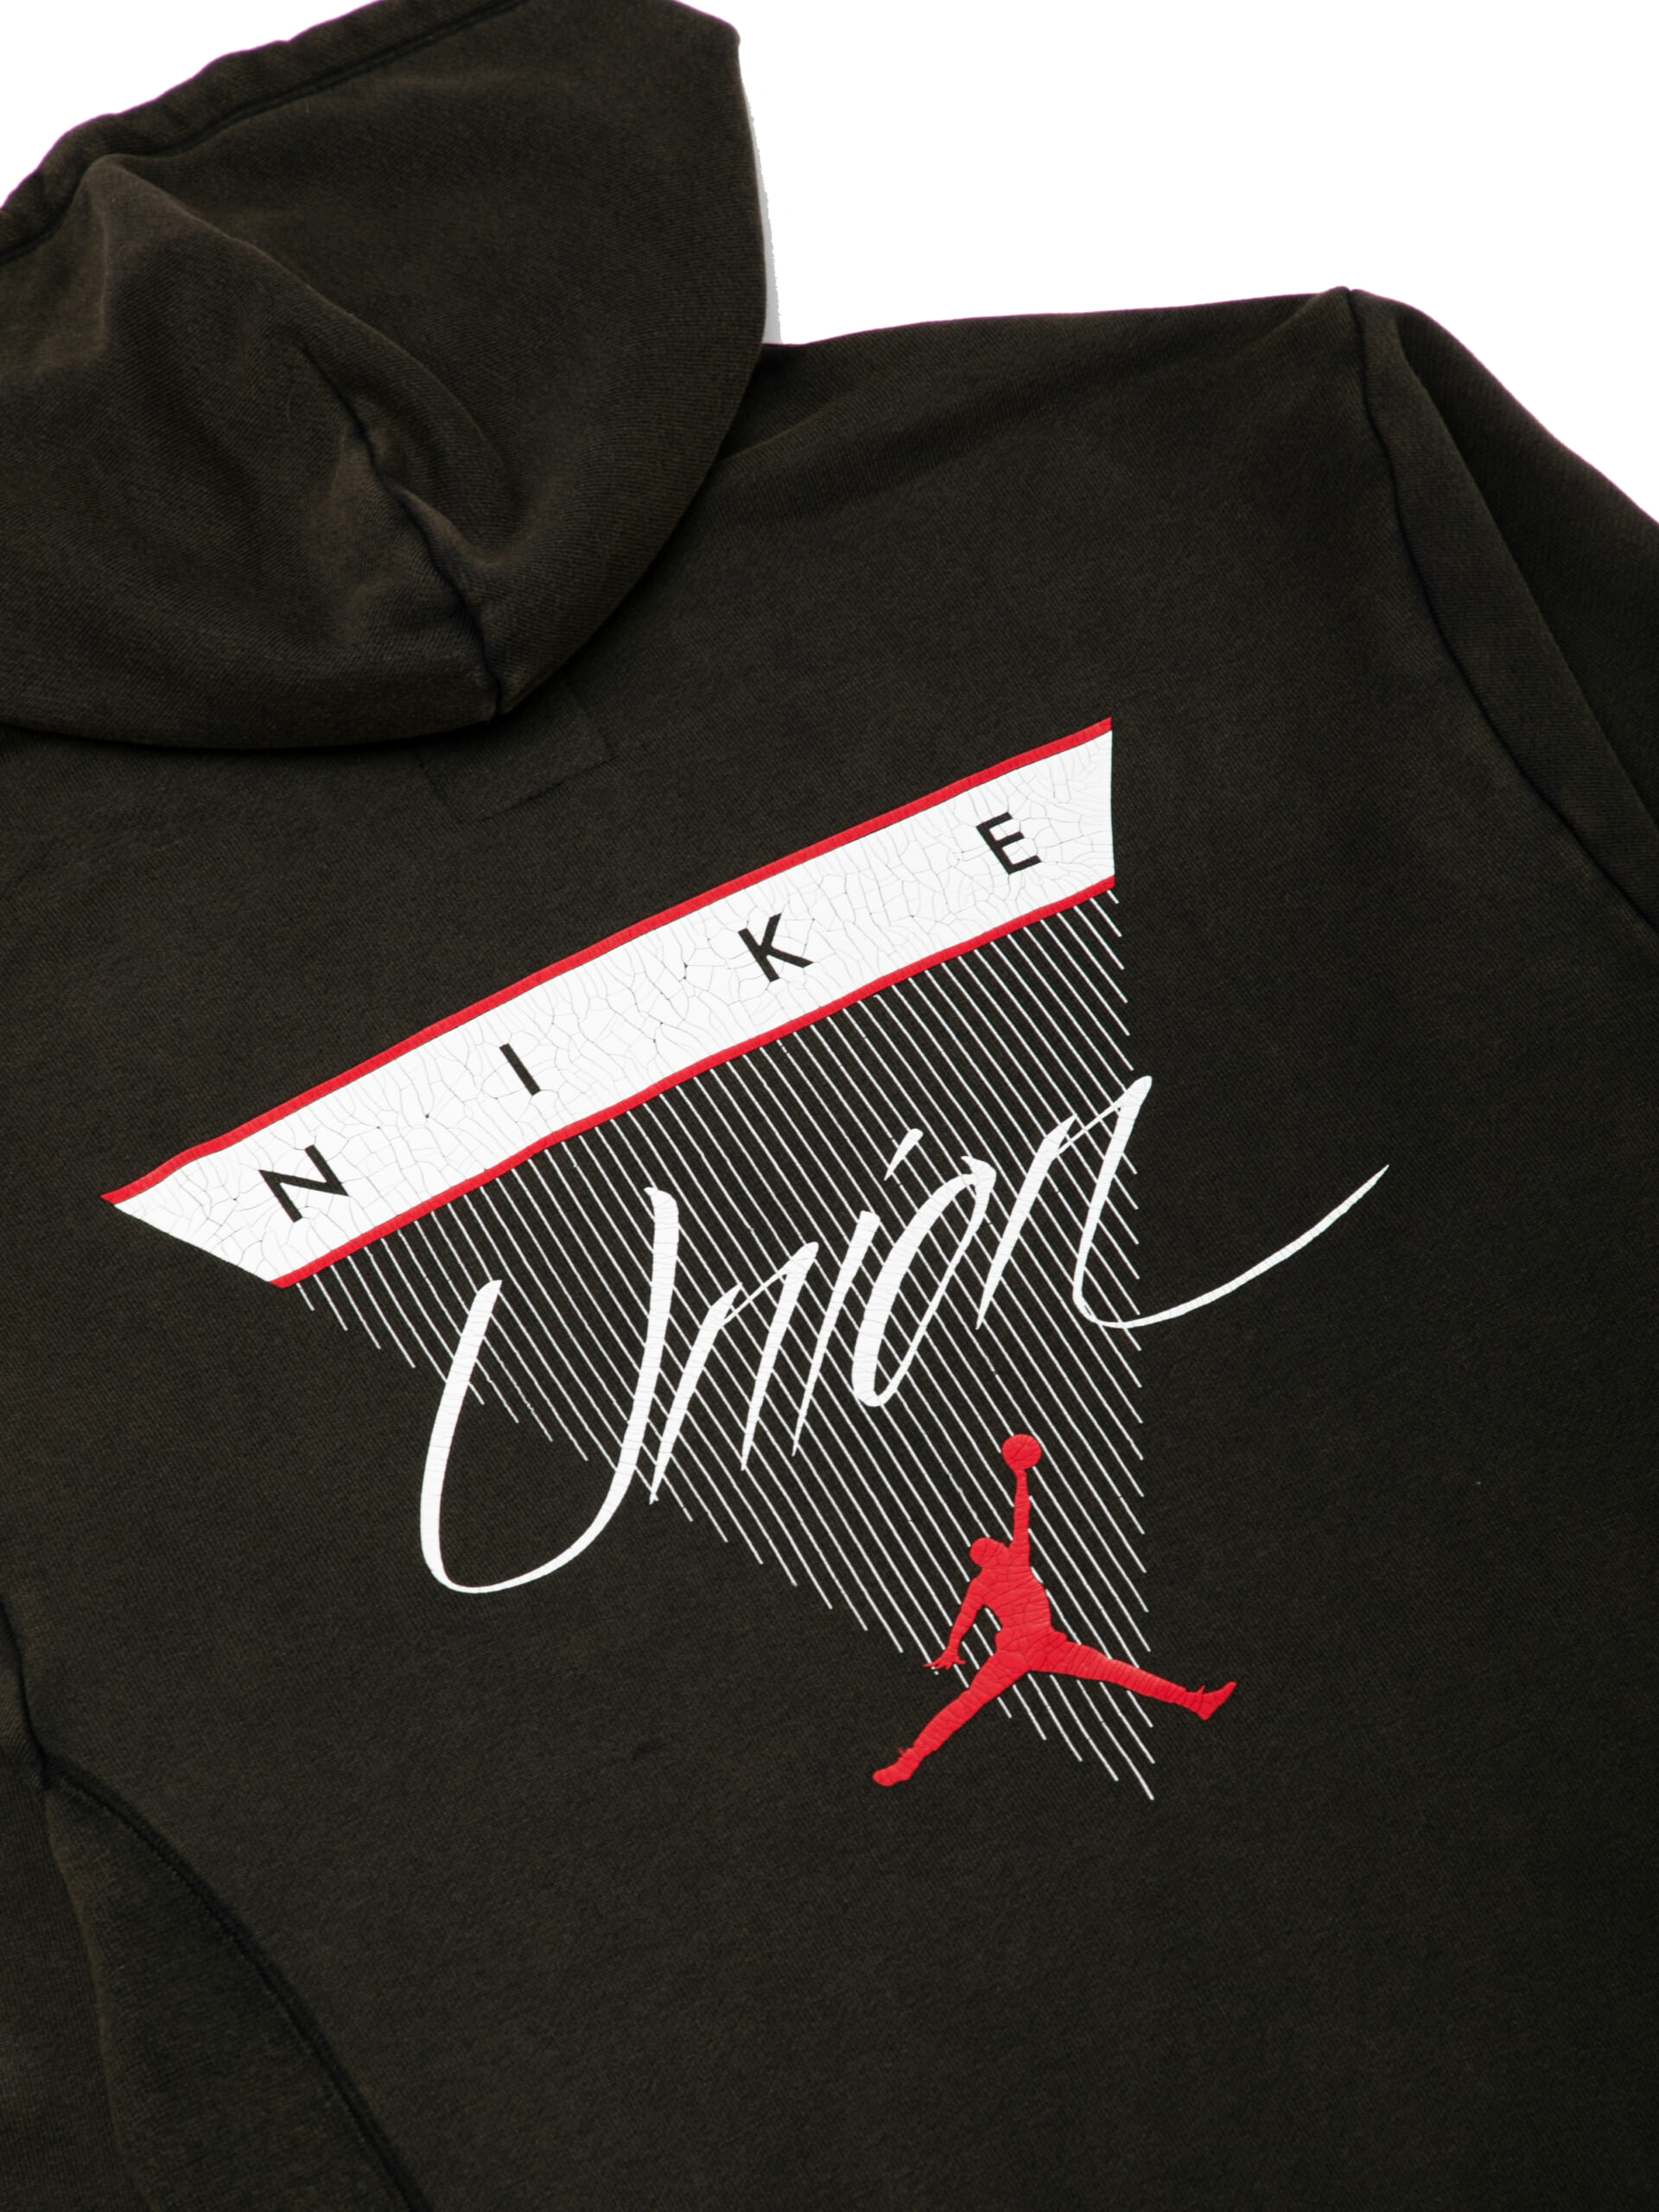 Check Out the New Vintage-Inspired Union x Air Jordan Style Collab - Maxim